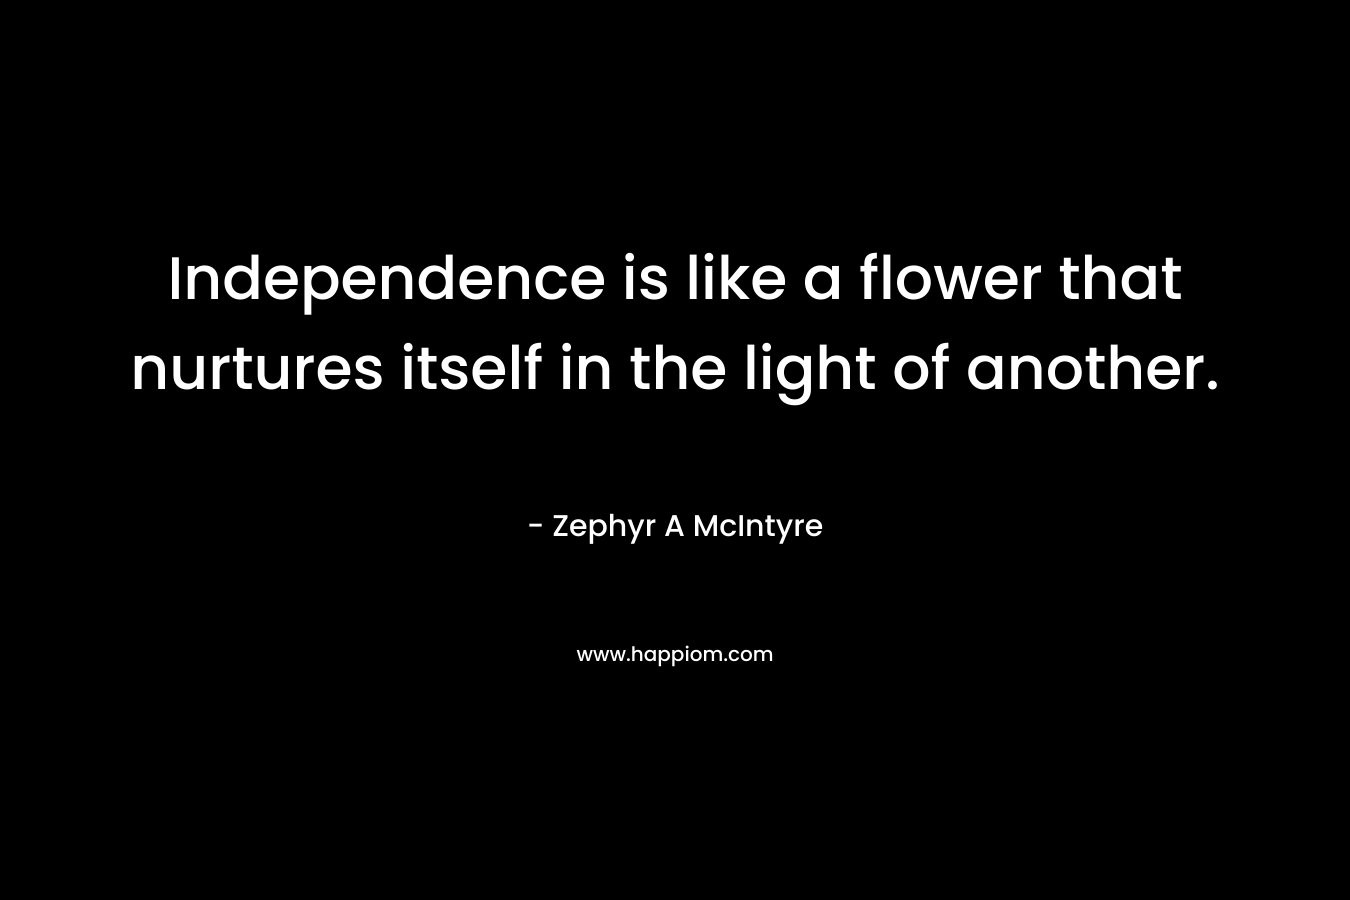 Independence is like a flower that nurtures itself in the light of another. – Zephyr A McIntyre